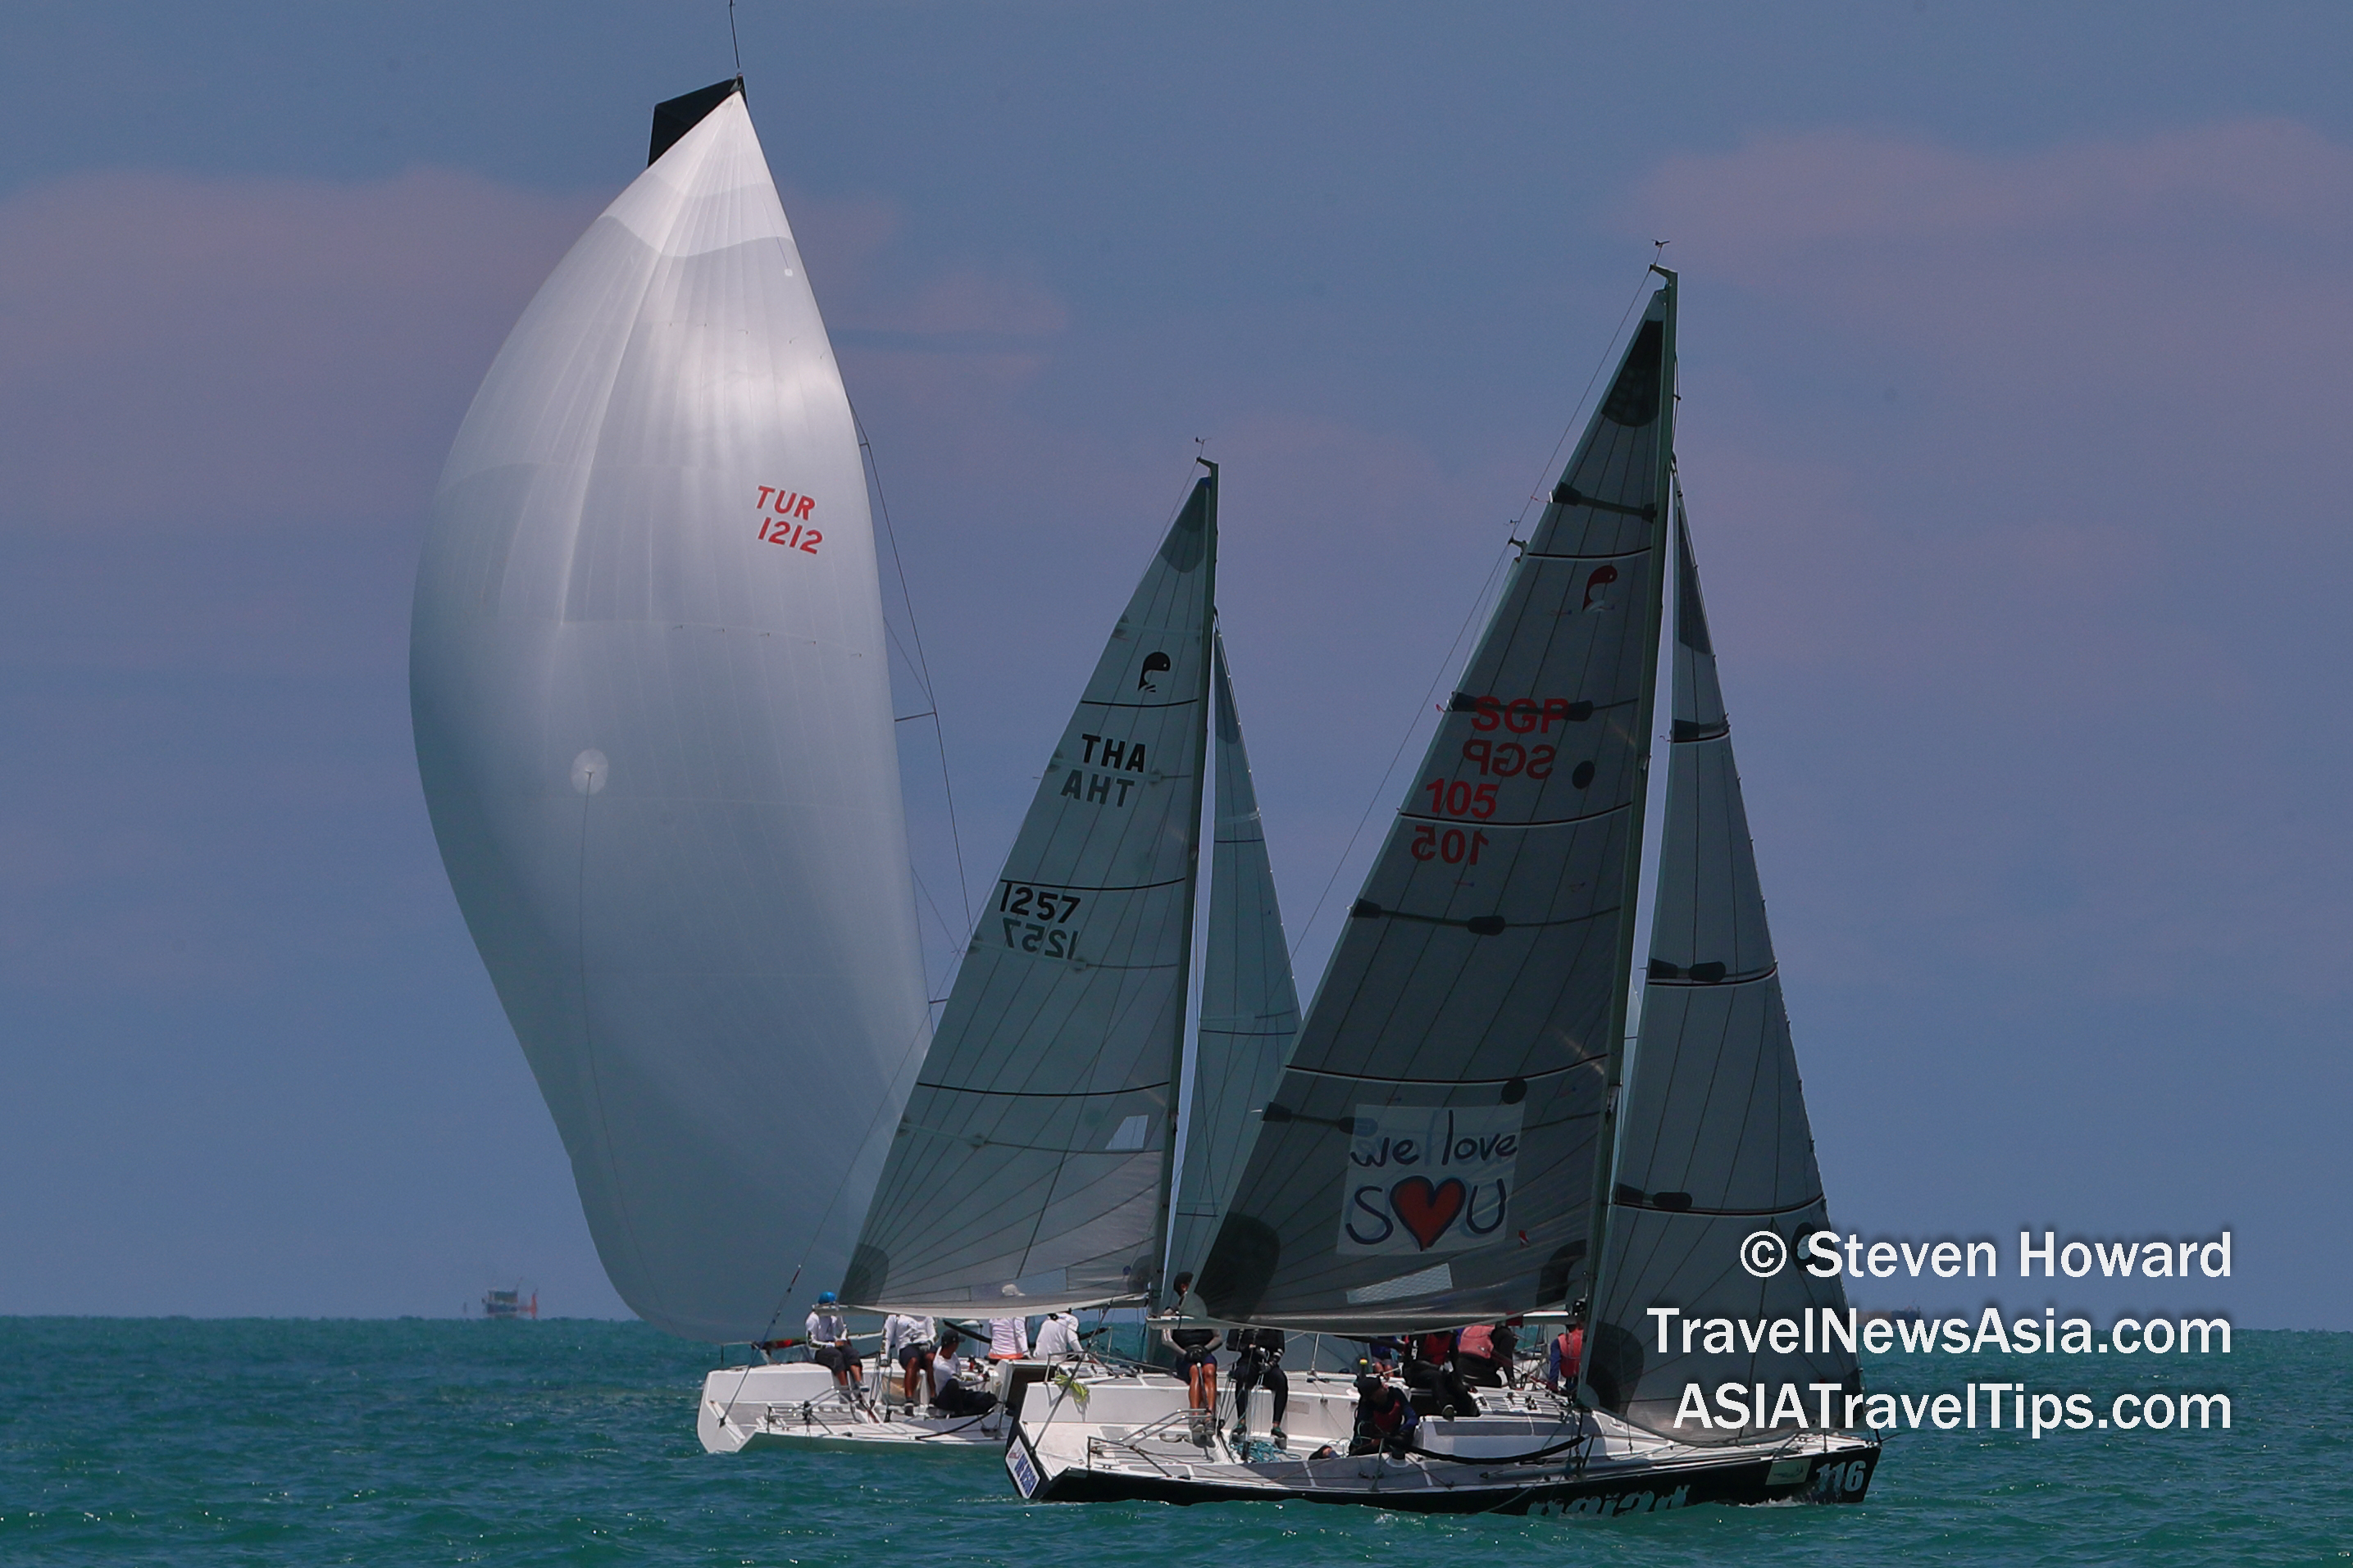 Yachts race n the Top of the Gulf Regatta 2019 in Pattaya, Thailand. Picture by Steven Howard of TravelNewsAsia.com Click to enlarge.